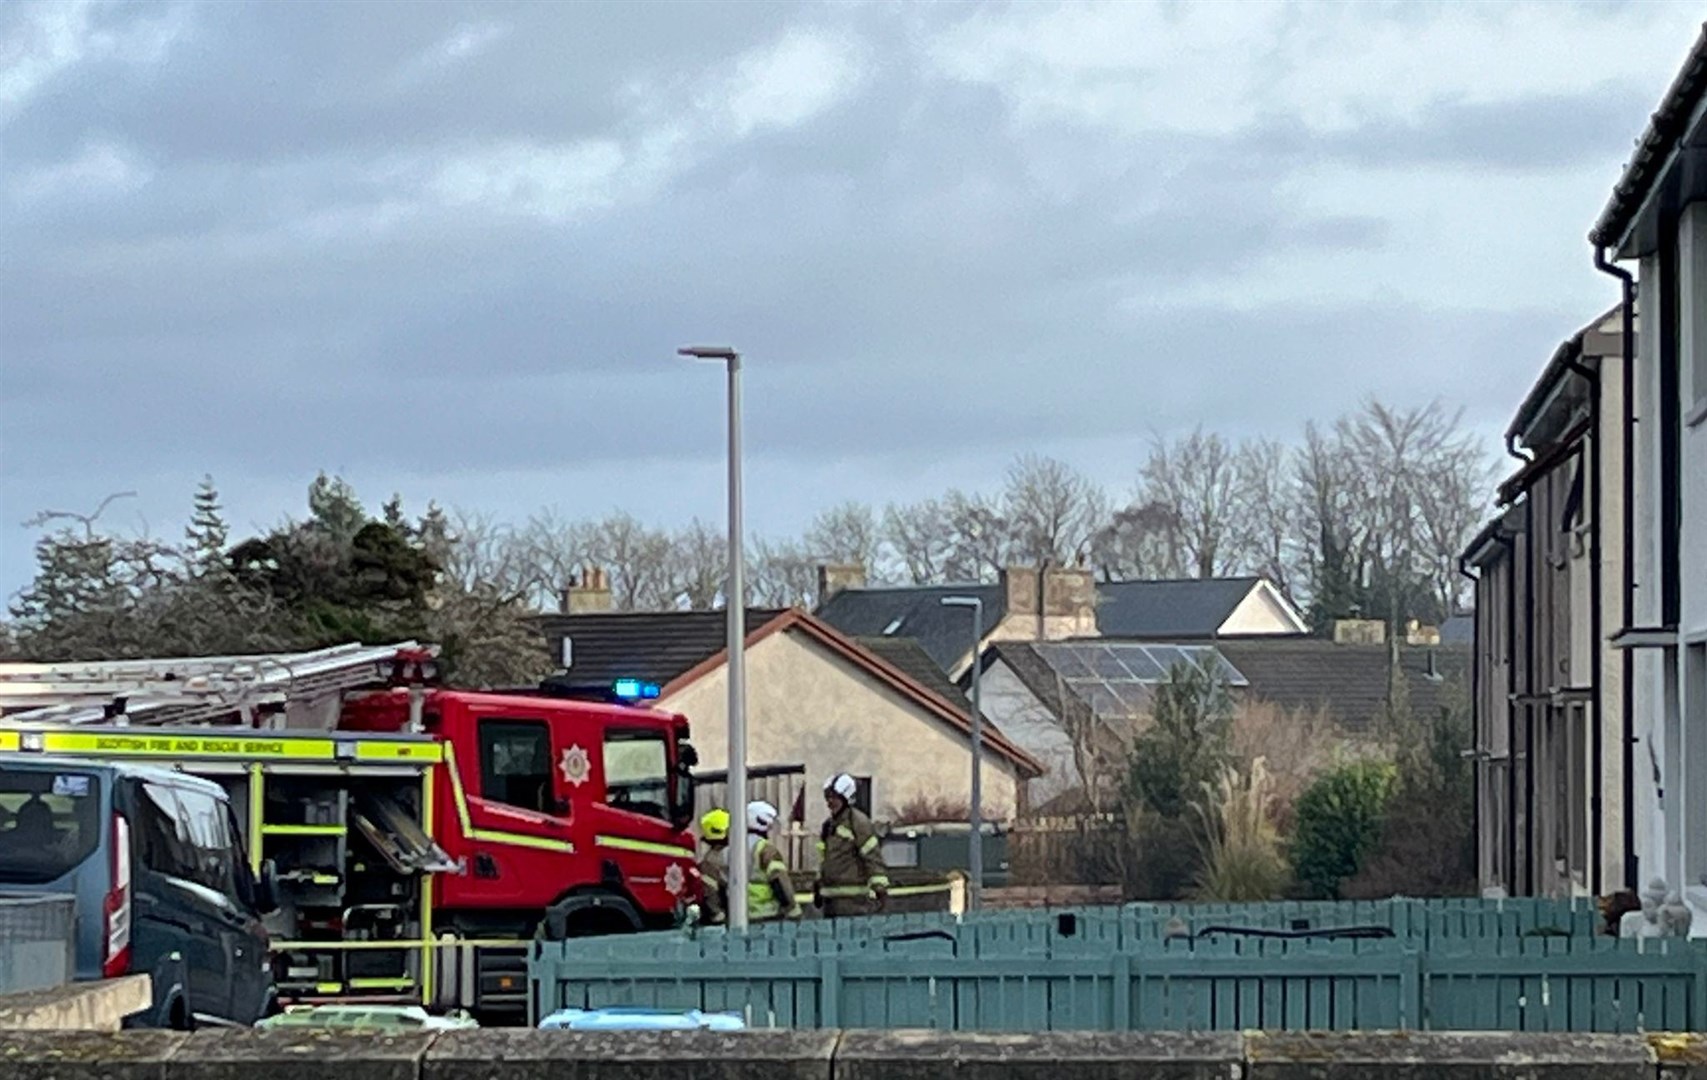 Two fire appliances were called to a blaze in Evanton this morning.